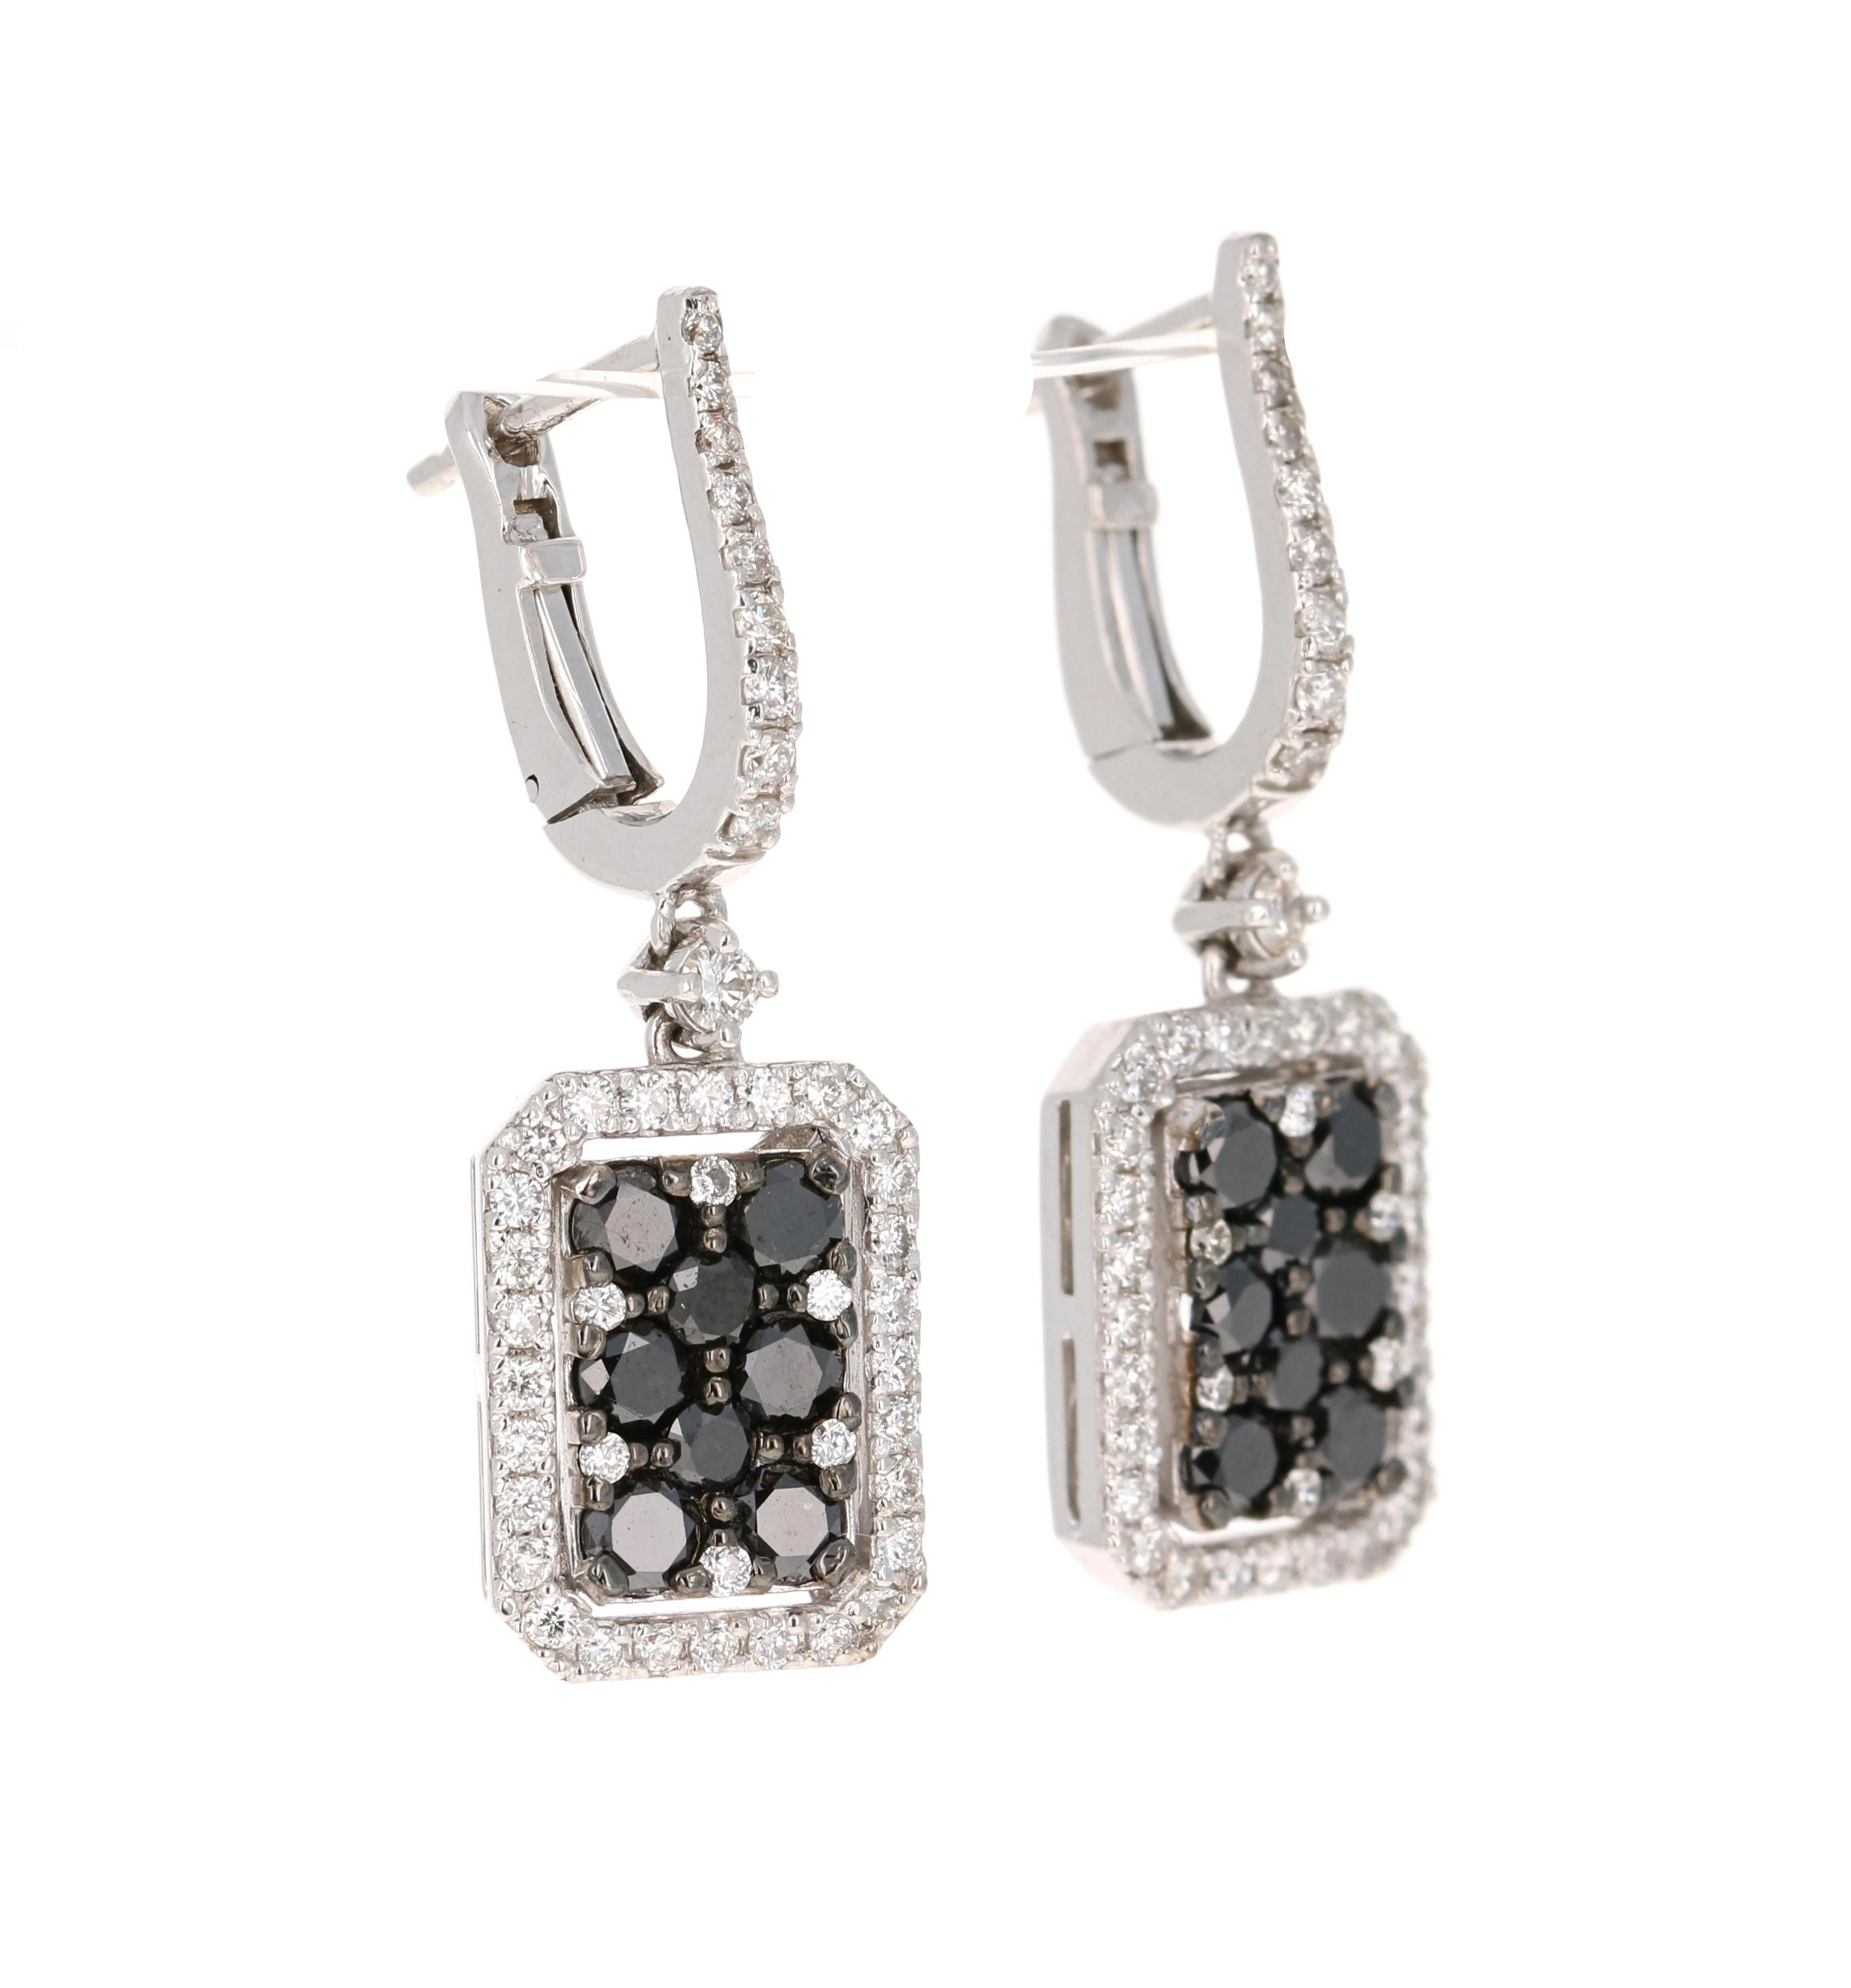 These earrings have 16 Round Cut Black Diamonds that weigh 1.38 carats and are surrounded with 88 Round Cut Diamonds that weigh 0.68 carats. (Clarity: VS, Color: F) The total carat weight of the earrings are 2.06 carats. 

The earrings are 1.25